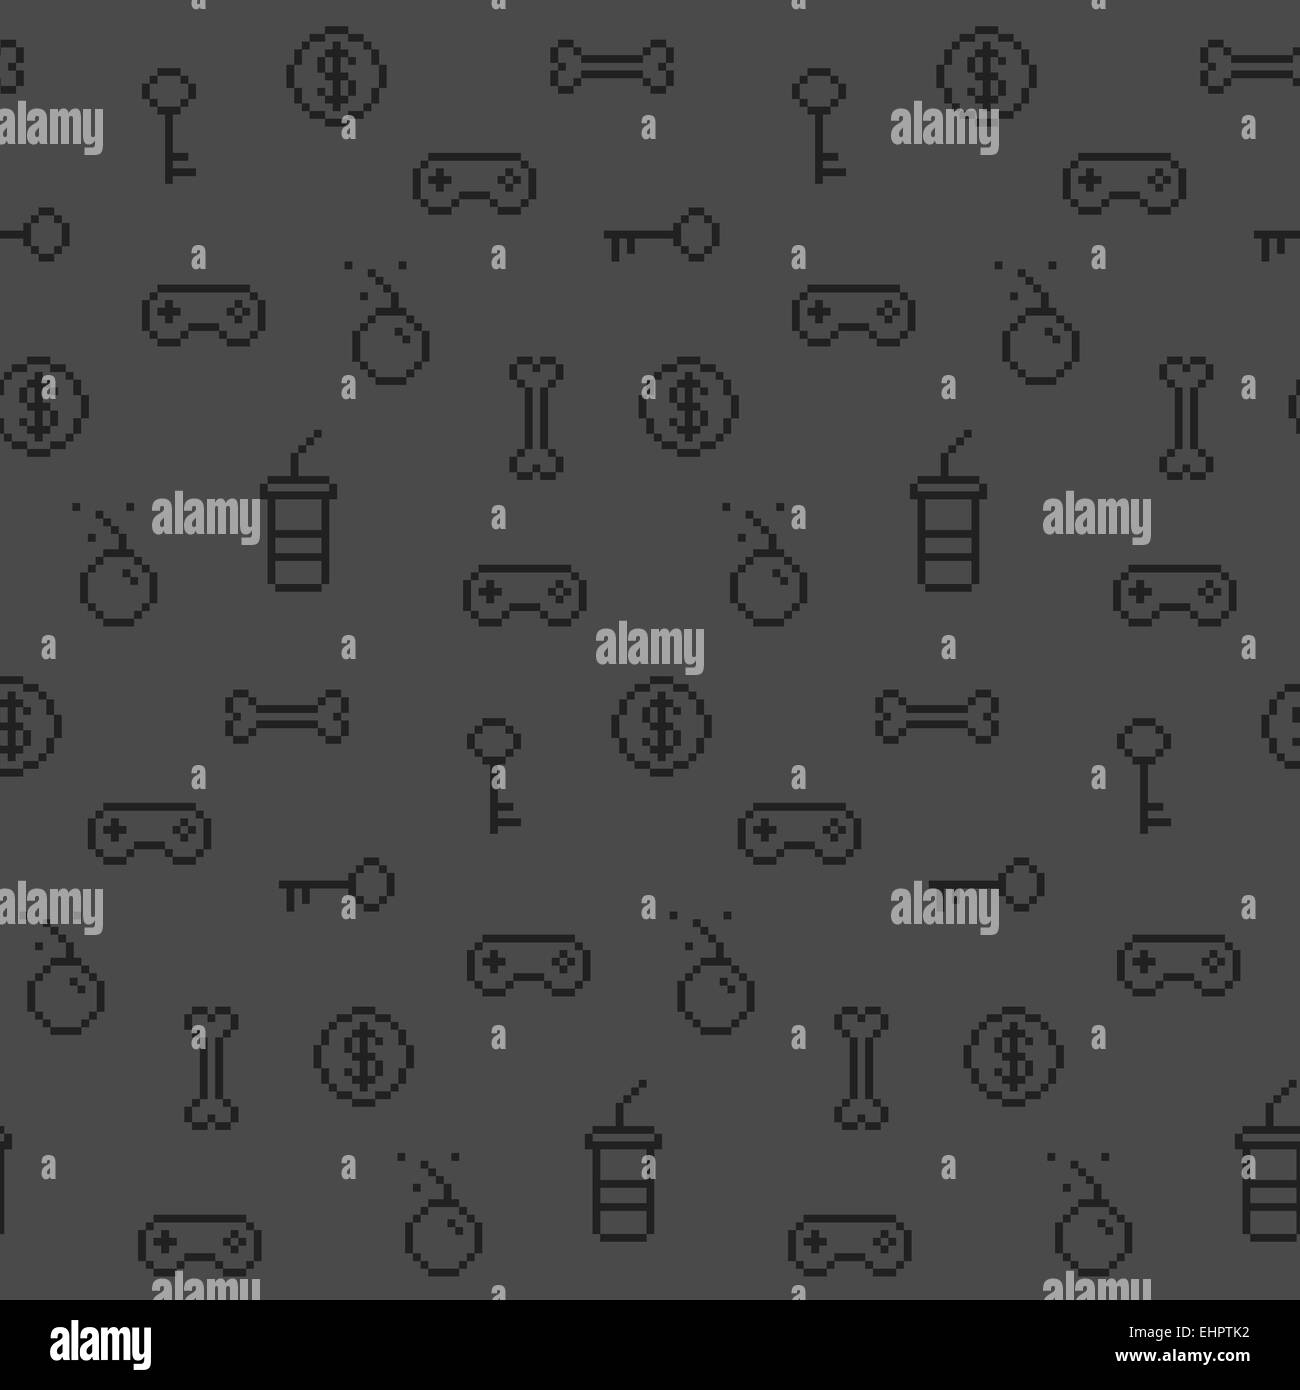 Seamless oldschool gaming inspired pattern, game icons, achievements, 90s background Stock Photo